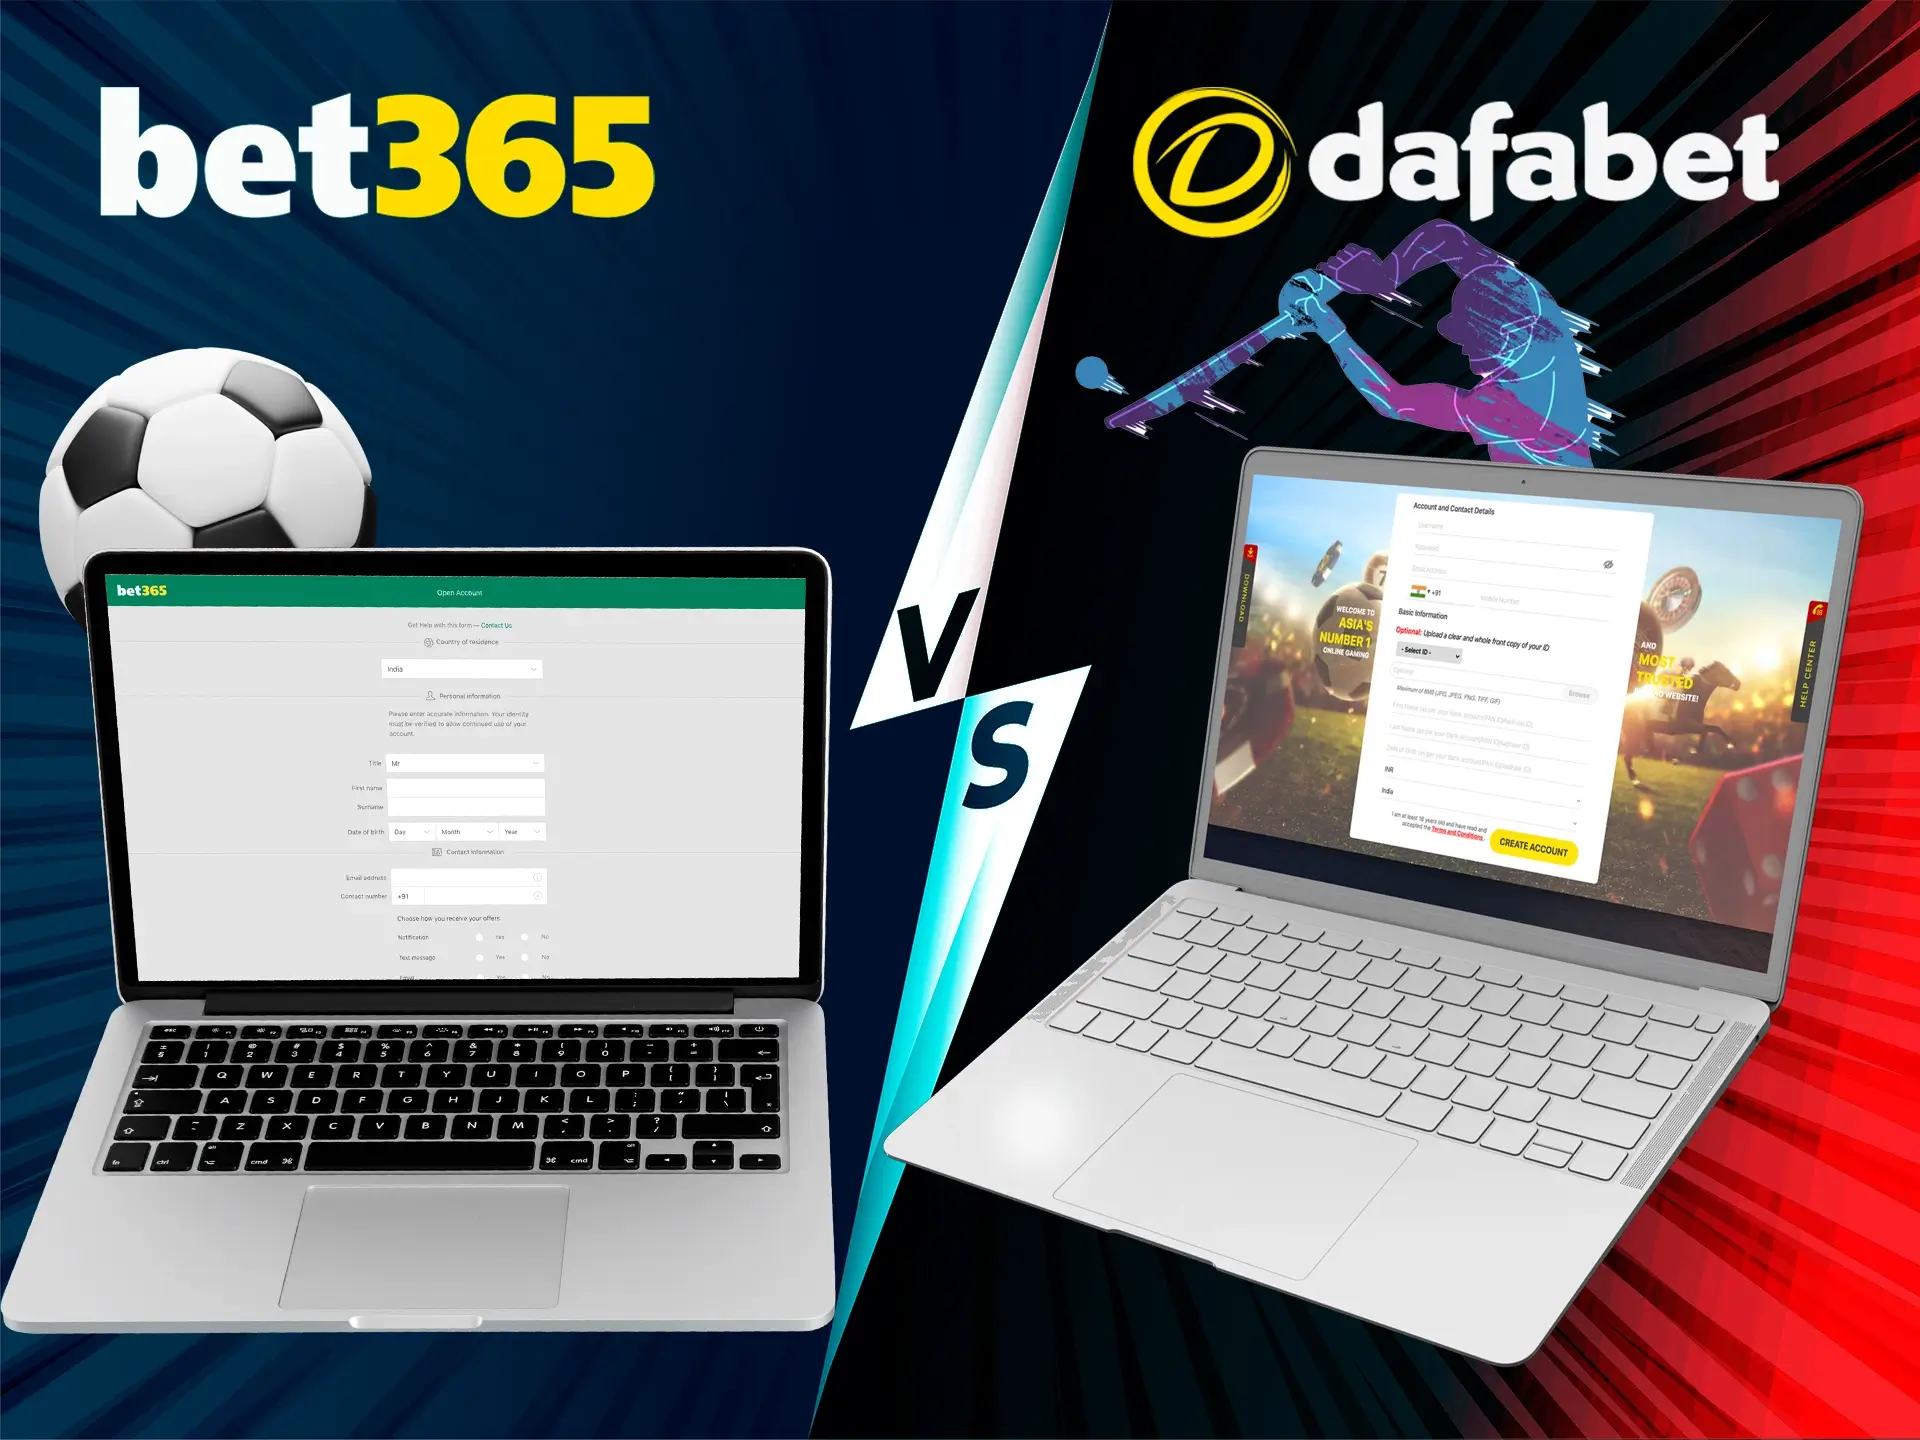 Sign up for Dafabet and Bet365 and find out who is better.